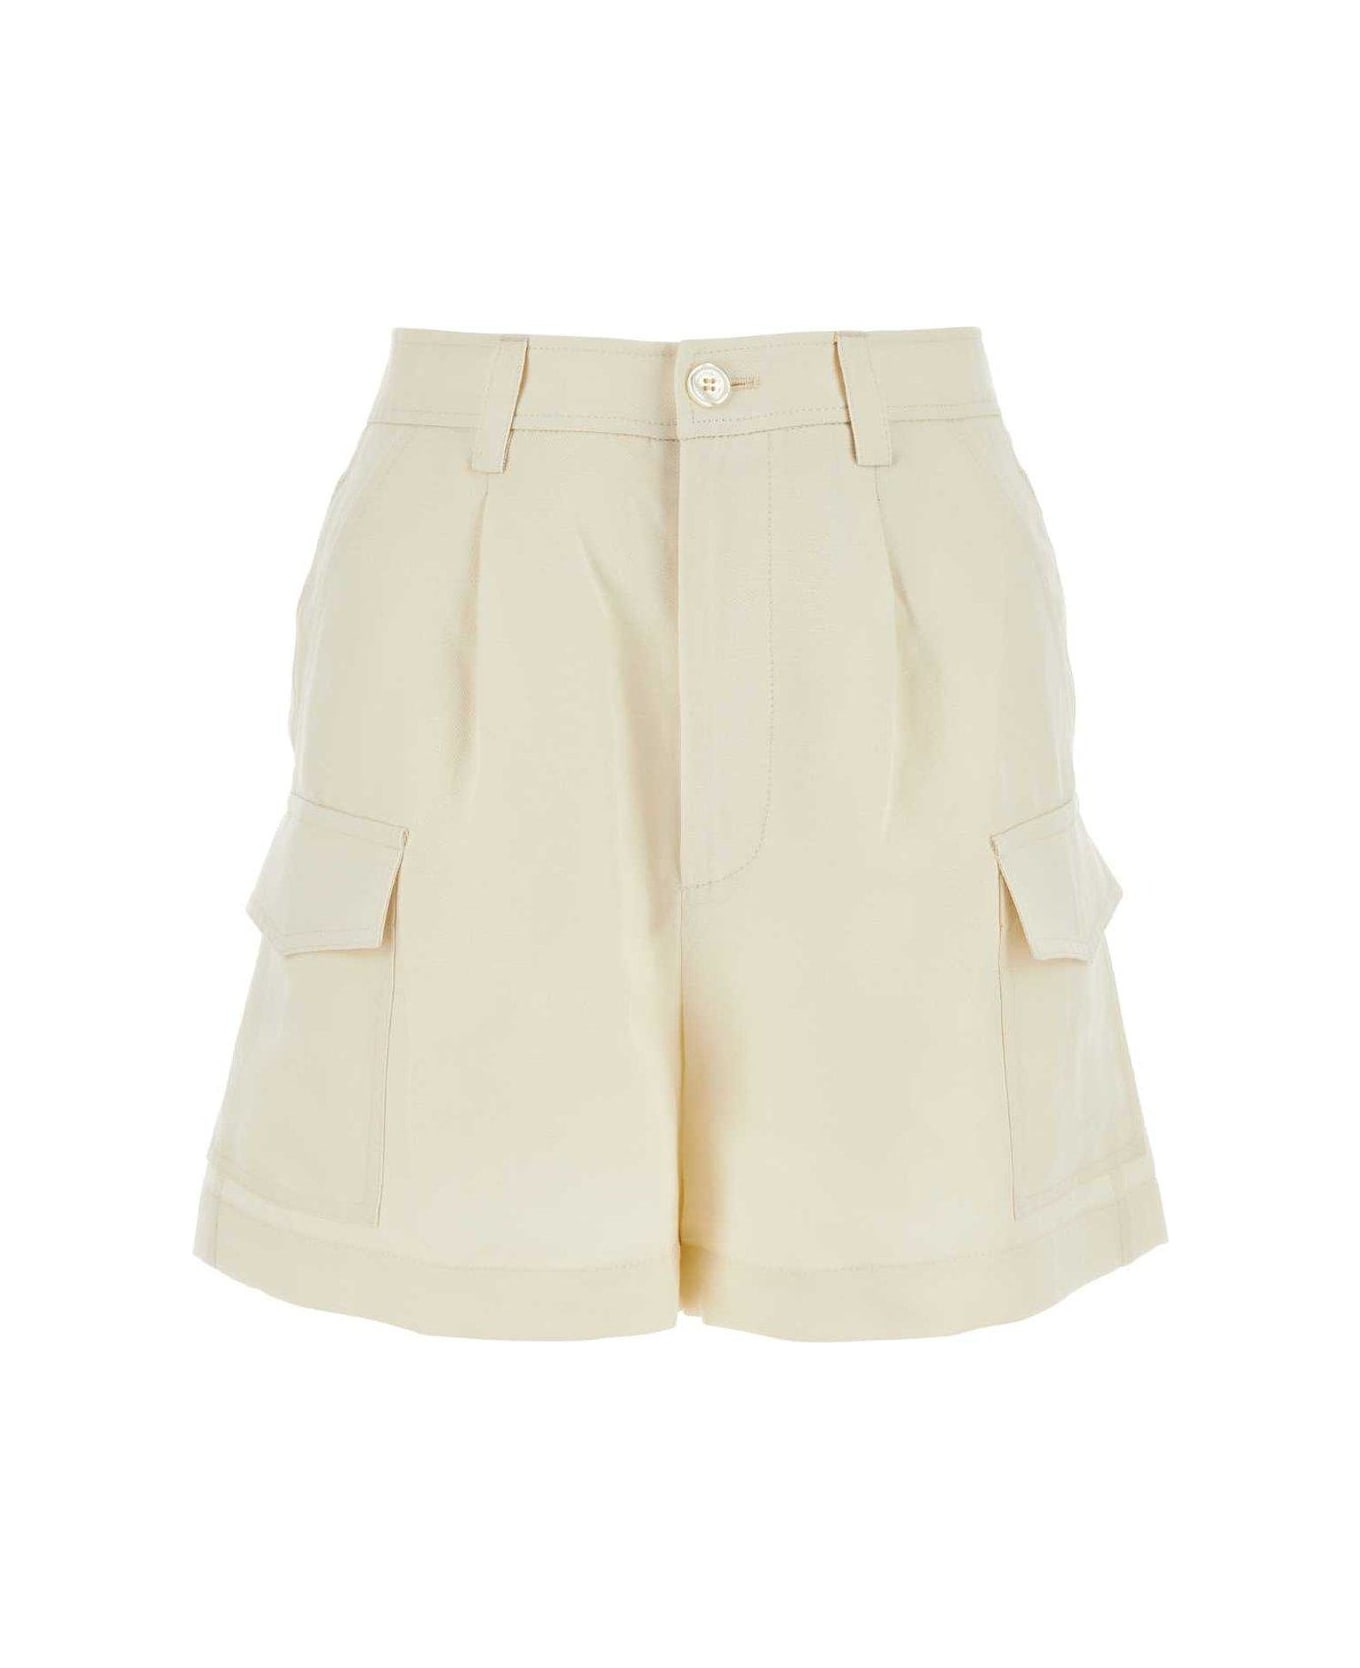 Woolrich Pleat-detailed Shorts - White ショートパンツ